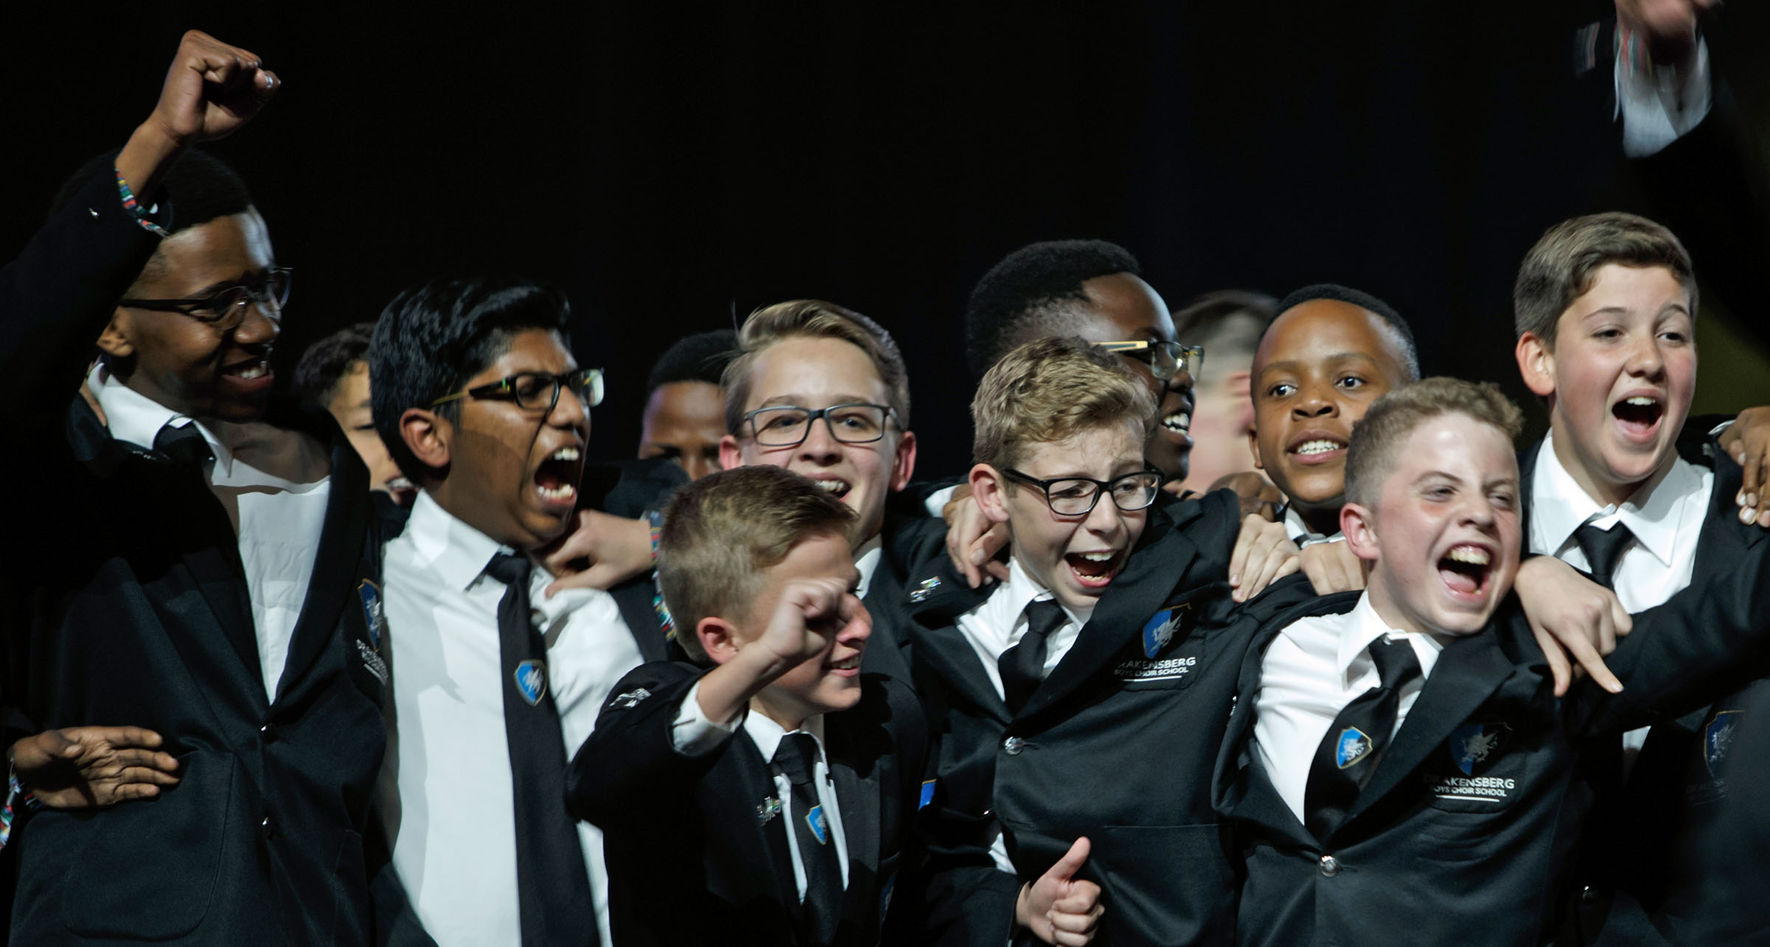 Drakensberg Boys' Choir at Awards Ceremony during the World Choir Games 2018 © Nolte Photography